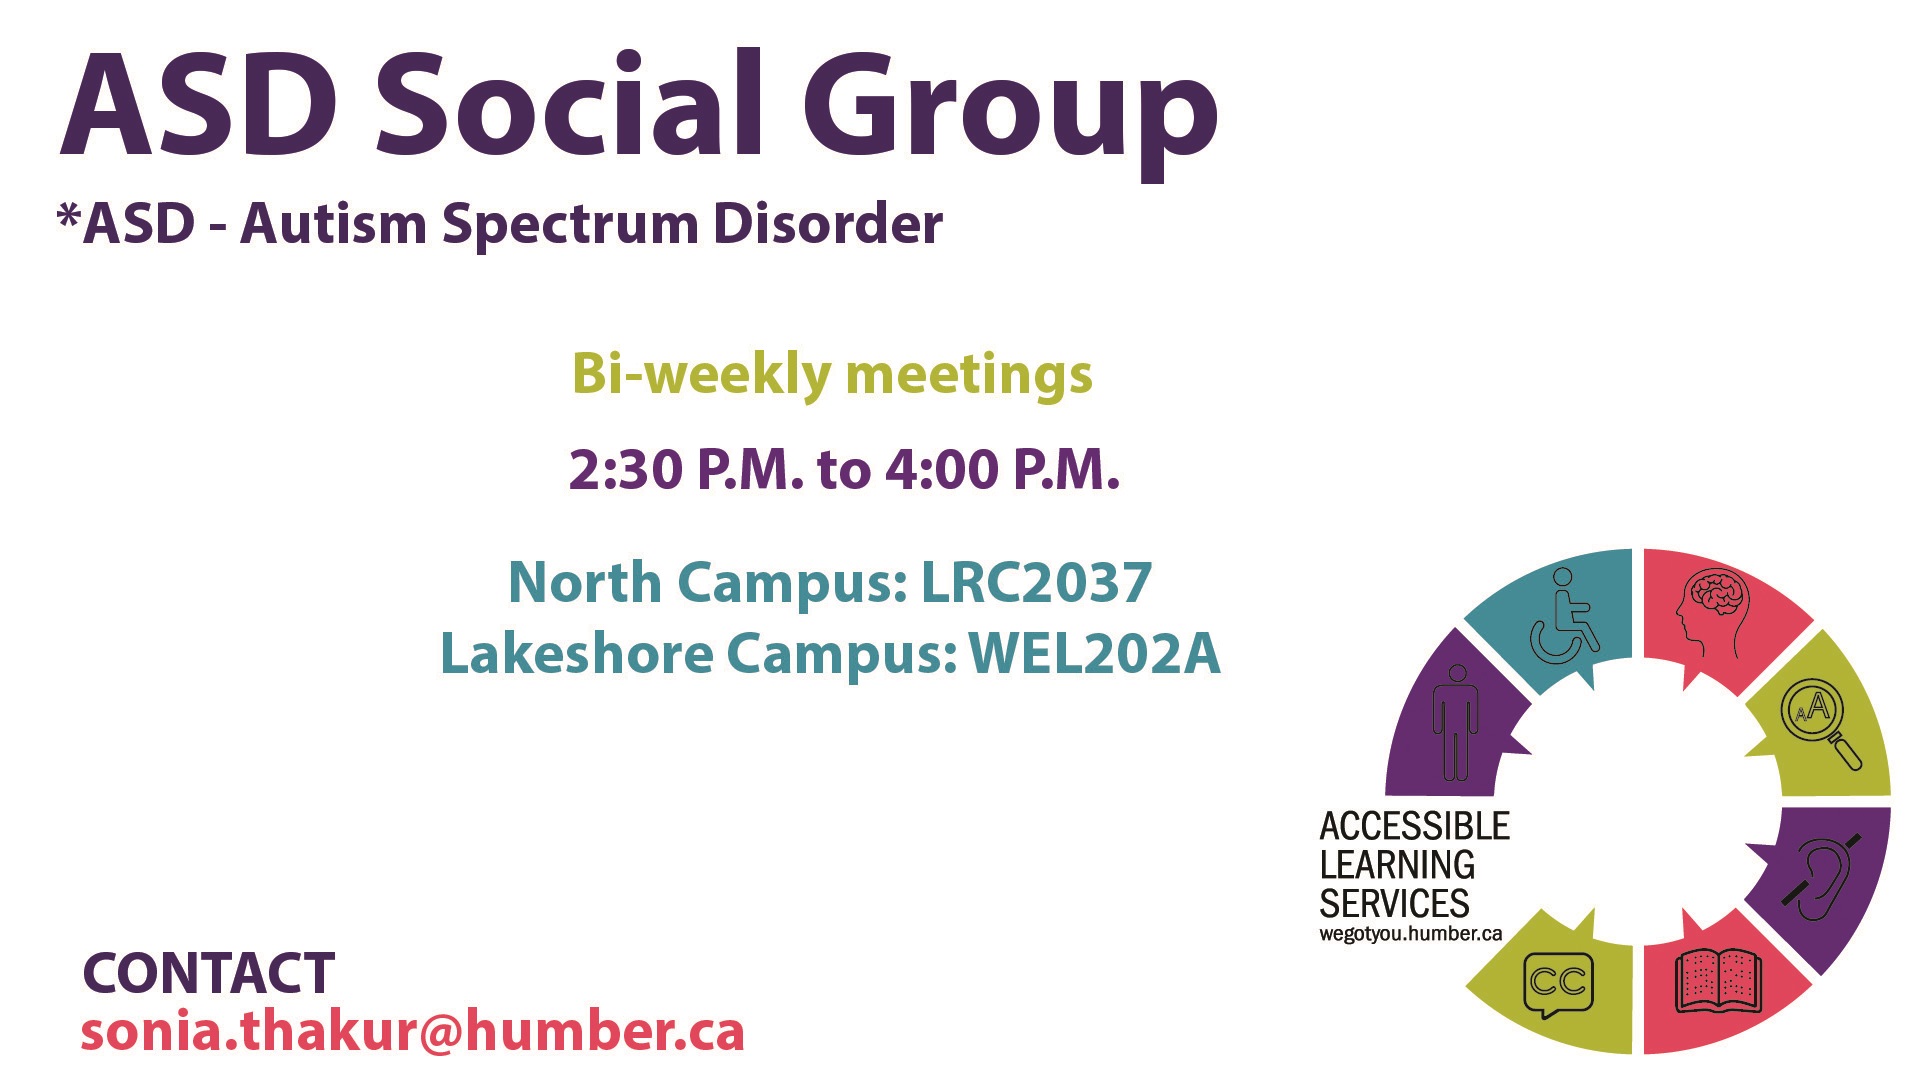 ASD Social Group Poster. For more information, email sonia.thakur@humber.ca